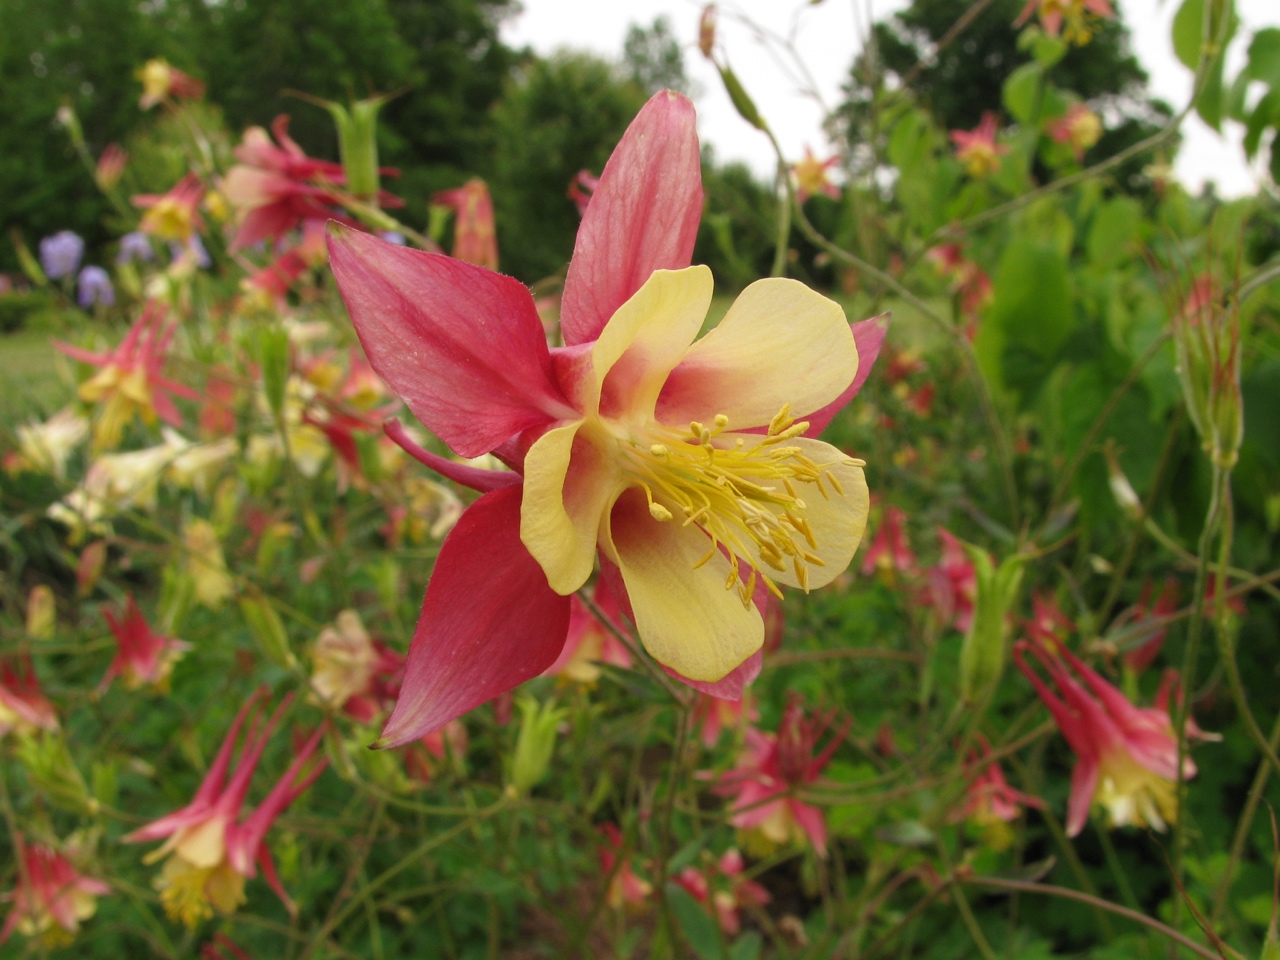 The Scientific Name is Aquilegia canadensis [= Aquilegia australis]. You will likely hear them called Wild Columbine. This picture shows the Close-up of flower of Aquilegia canadensis [= Aquilegia australis]